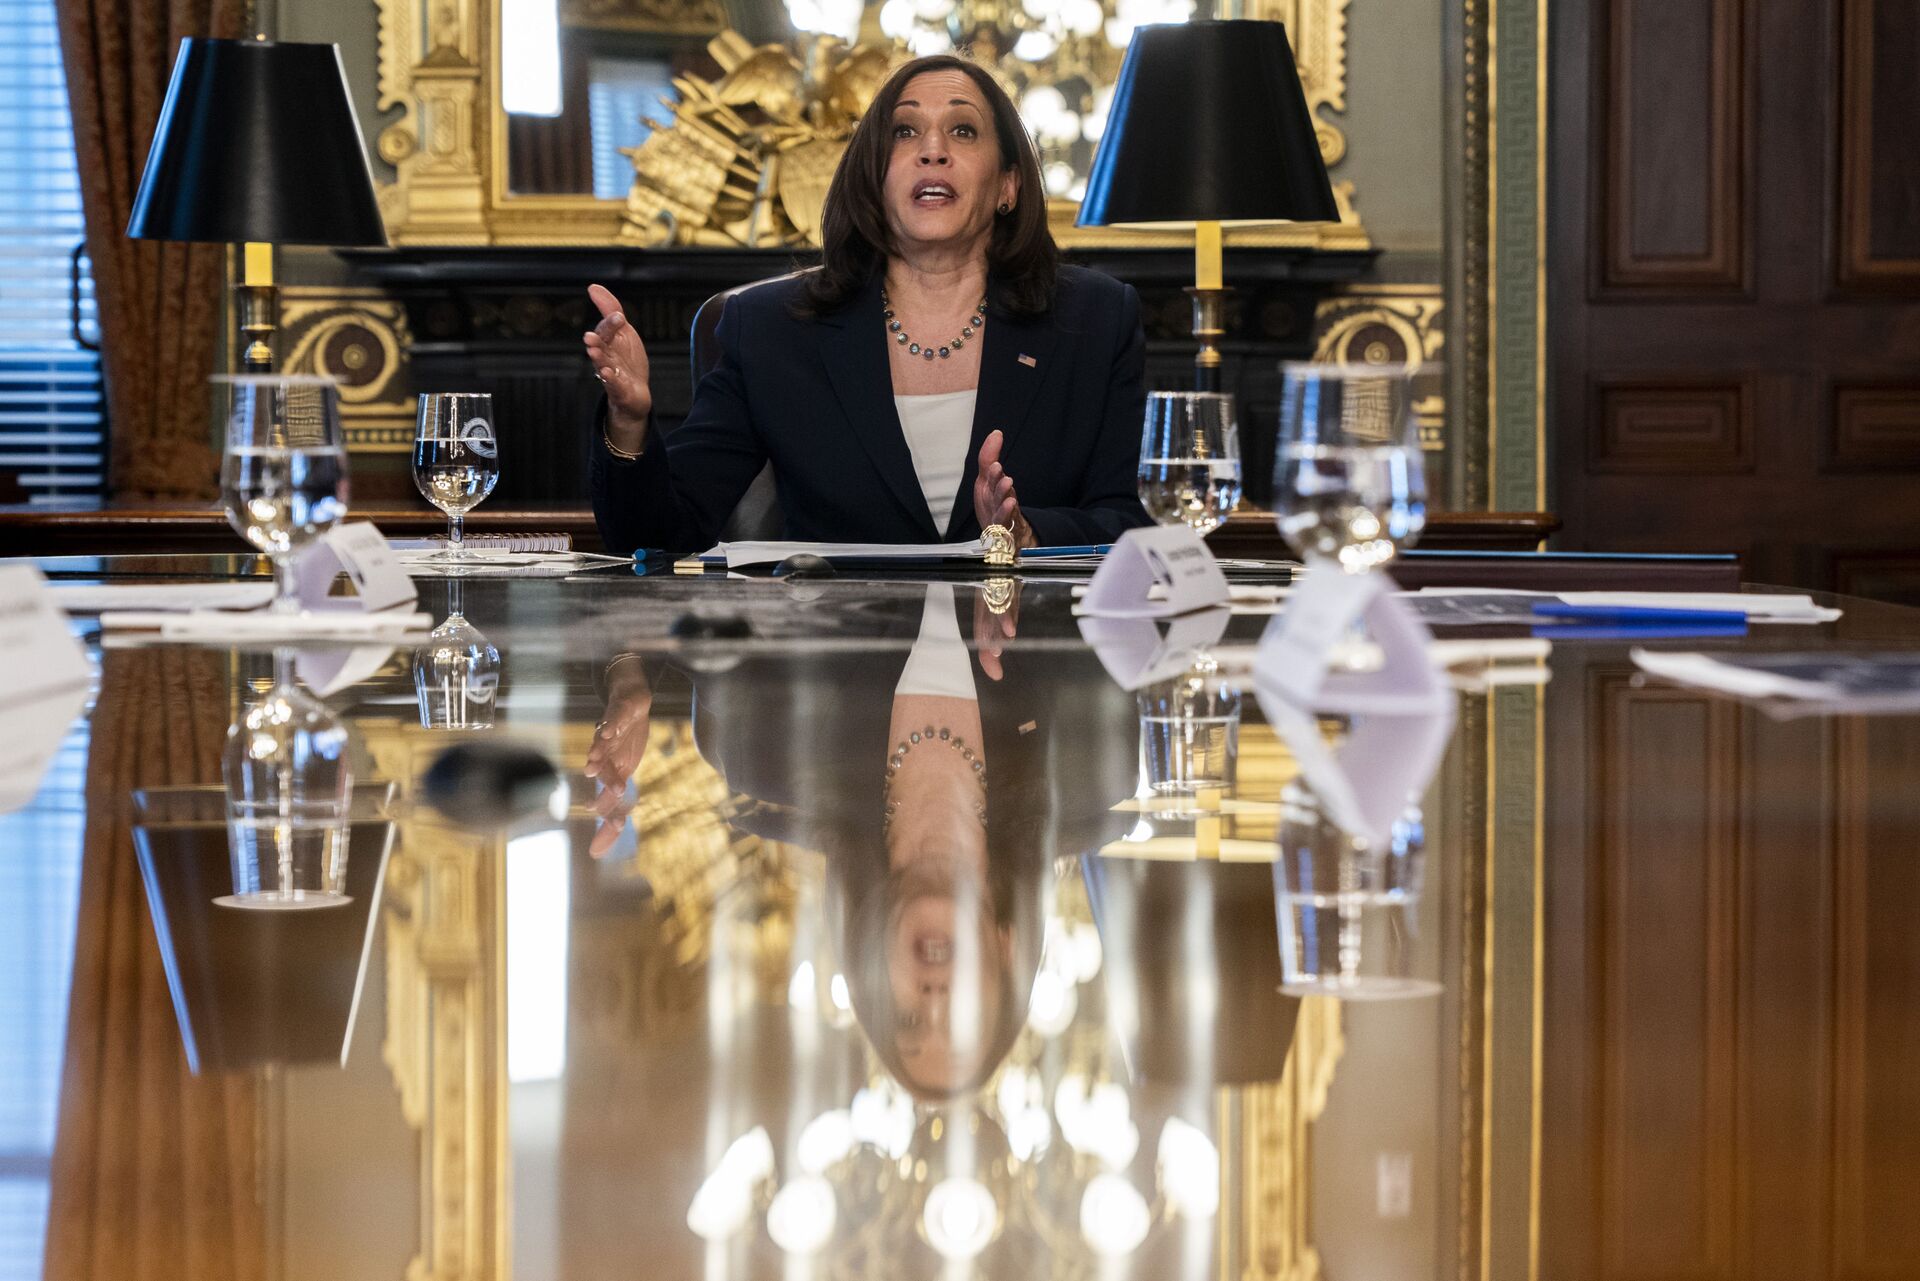 Vice President Kamala Harris is reflected in a table as she speaks during the inaugural meeting of the Task Force on Worker Organizing and Empowerment, in Harris' ceremonial office, Thursday, May 13, 2021, on the White House complex in Washington - Sputnik International, 1920, 07.09.2021